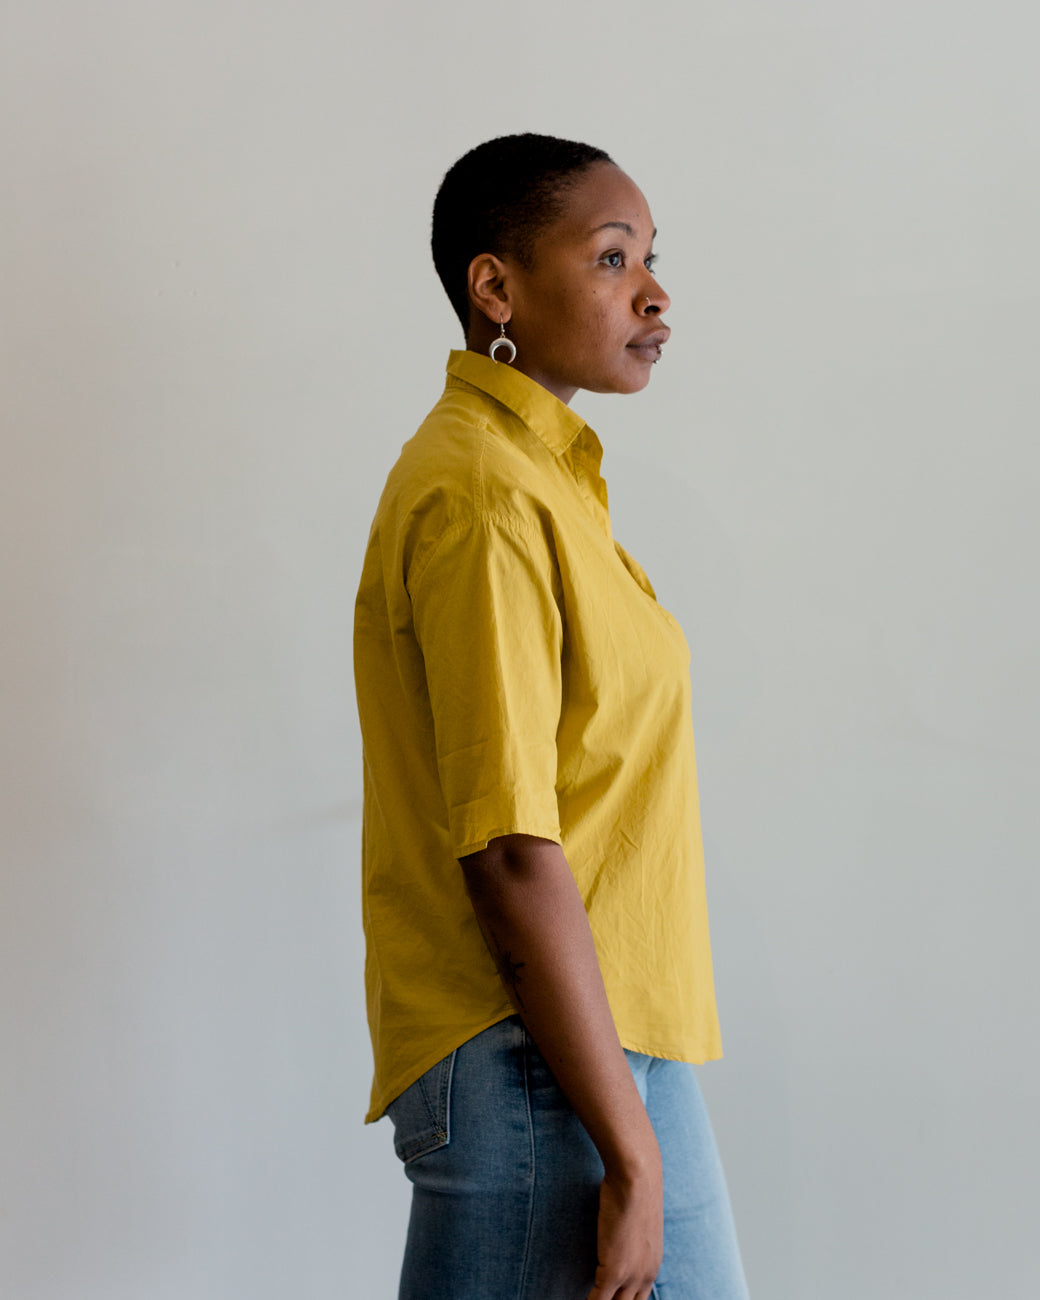 A Shirt Thing Delilah Top in Chartreuse